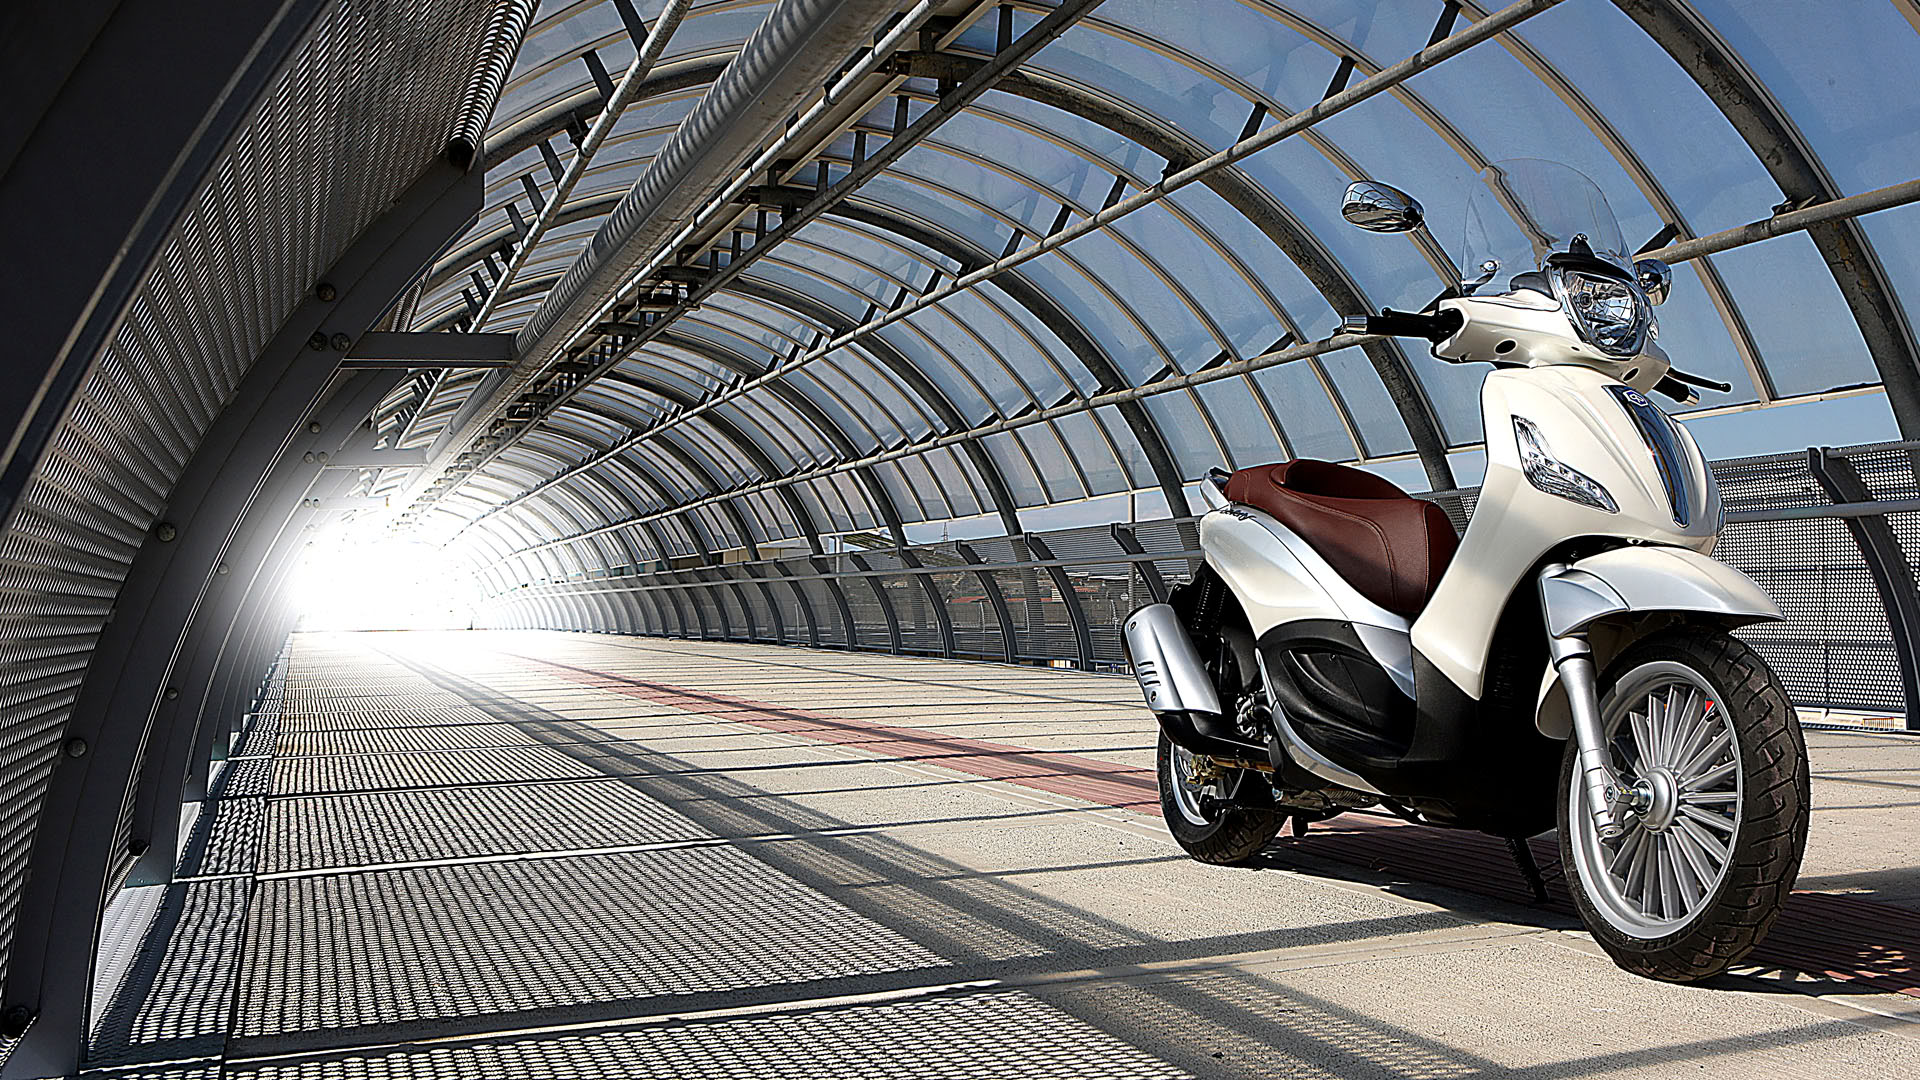 Piaggio Beverly 300ie 2010 - HD Scooter Wallpaper (1920x1080)